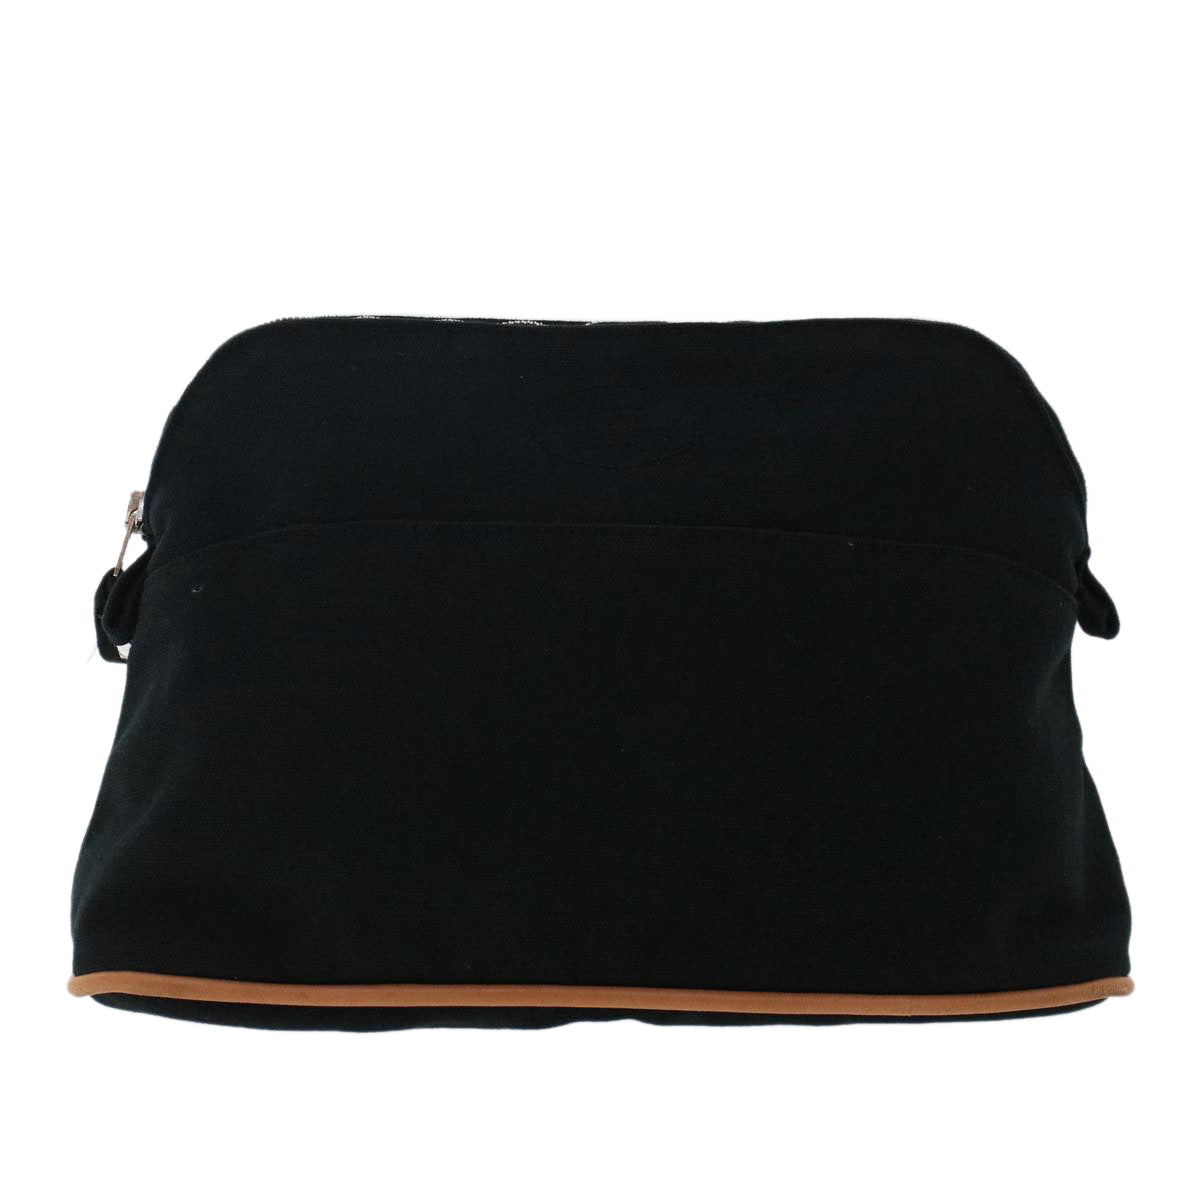 HERMES Bolide Pouch Canvas Black Auth bs7239